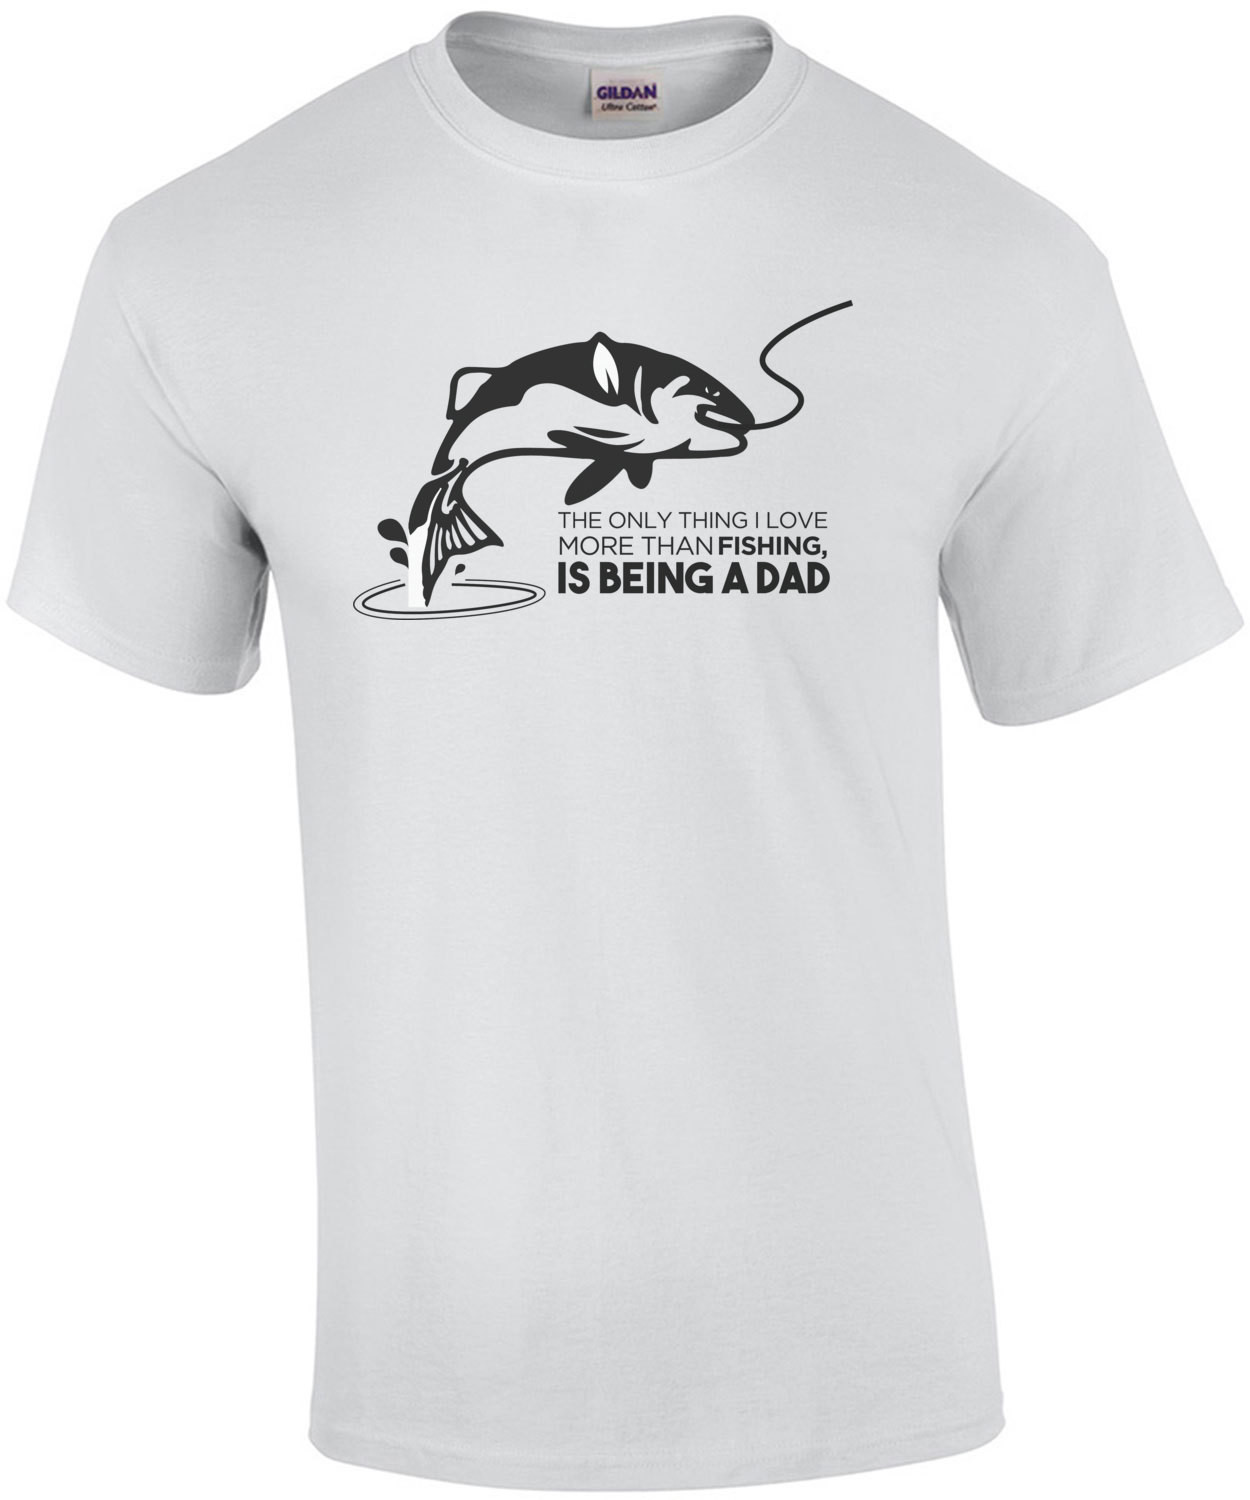 The only thing I love more than fishing, is being a dad - funny fishing t-shirt